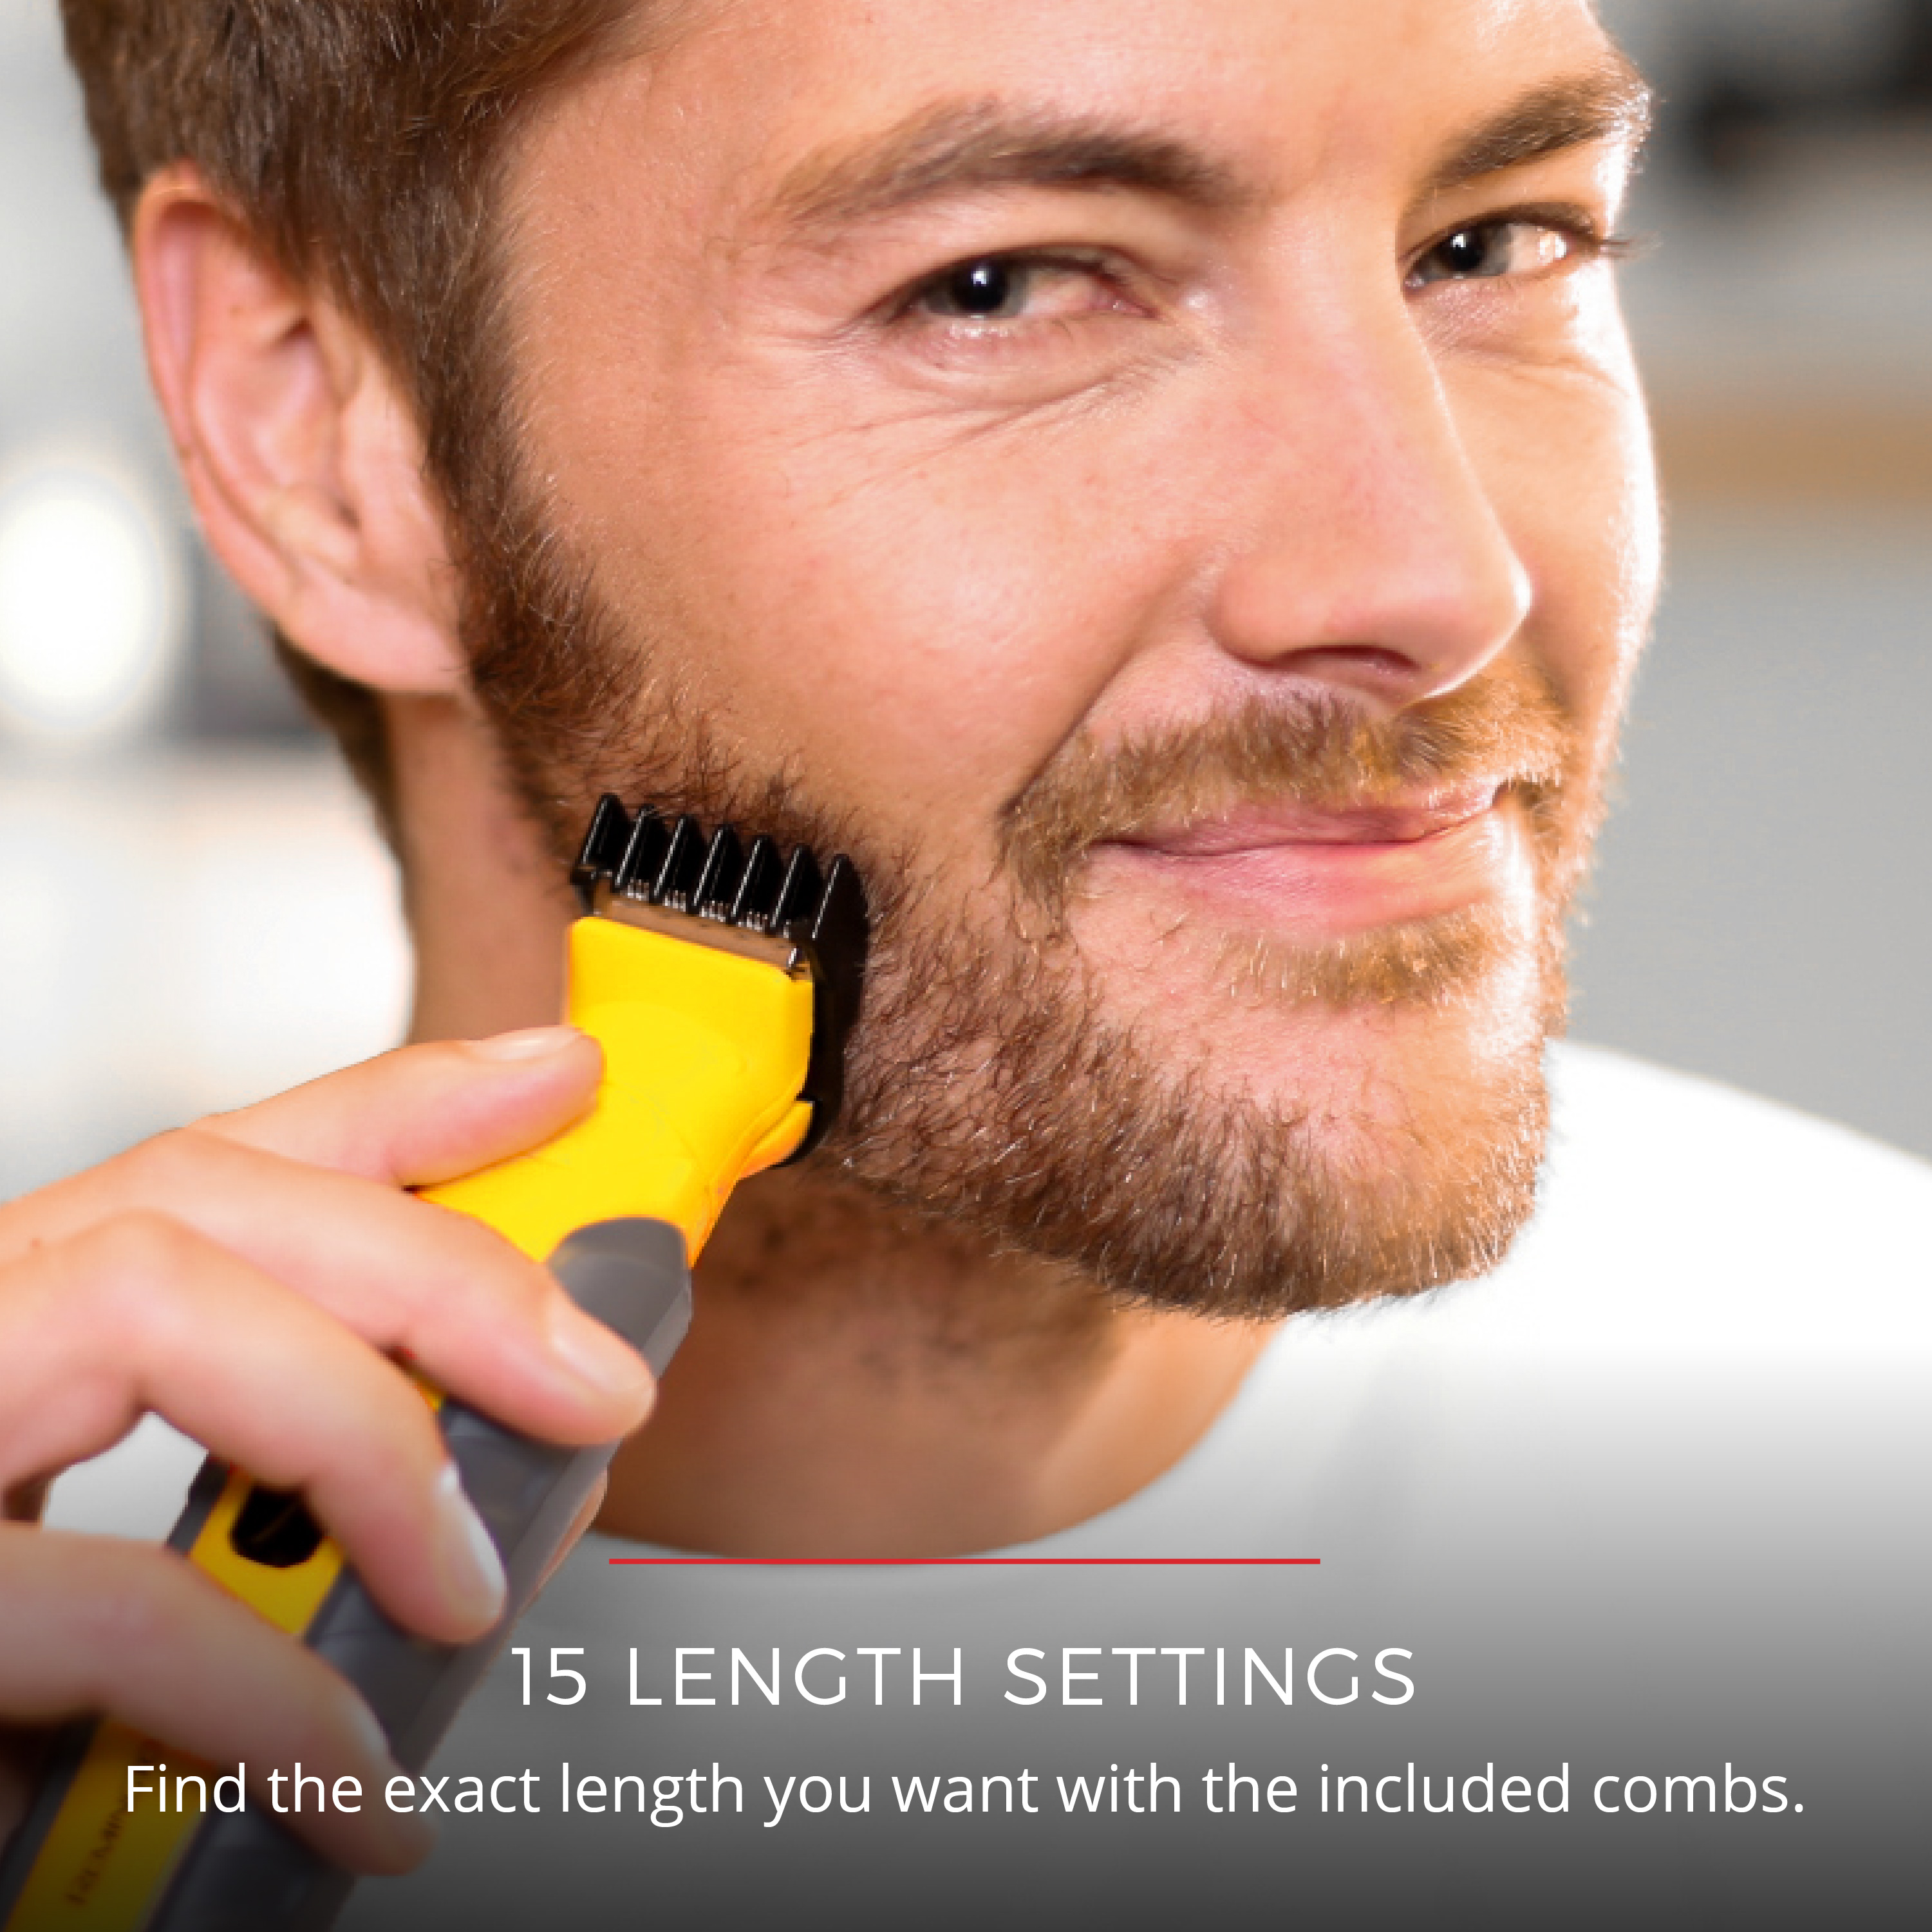 Remington Virtually Indestructible All-in-One Grooming Kit, Yellow/Black, PG6855A - image 6 of 9